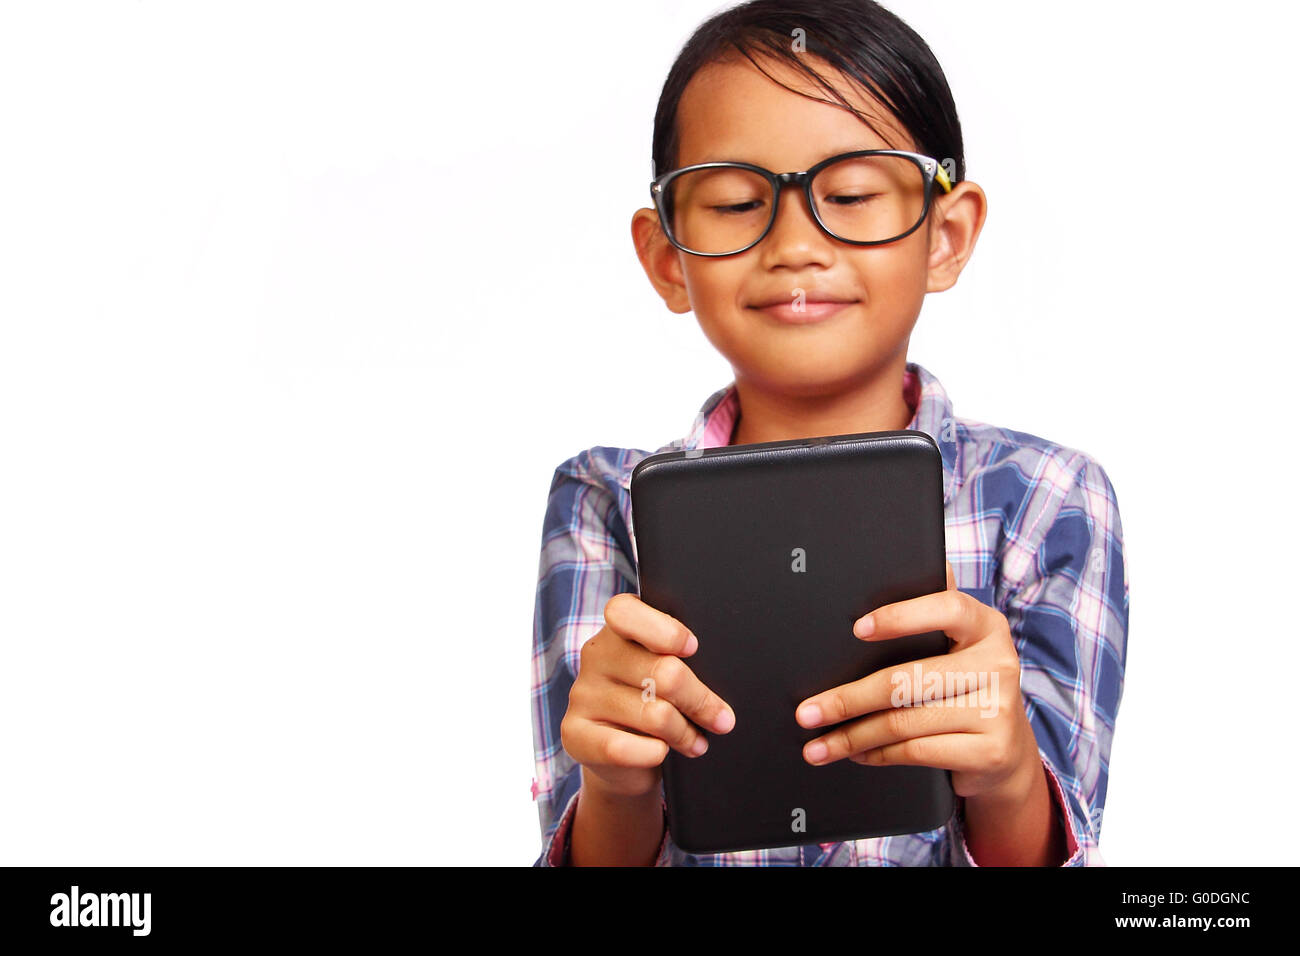 Little girl with glasses smiling while looking her tablet isolated on white Stock Photo